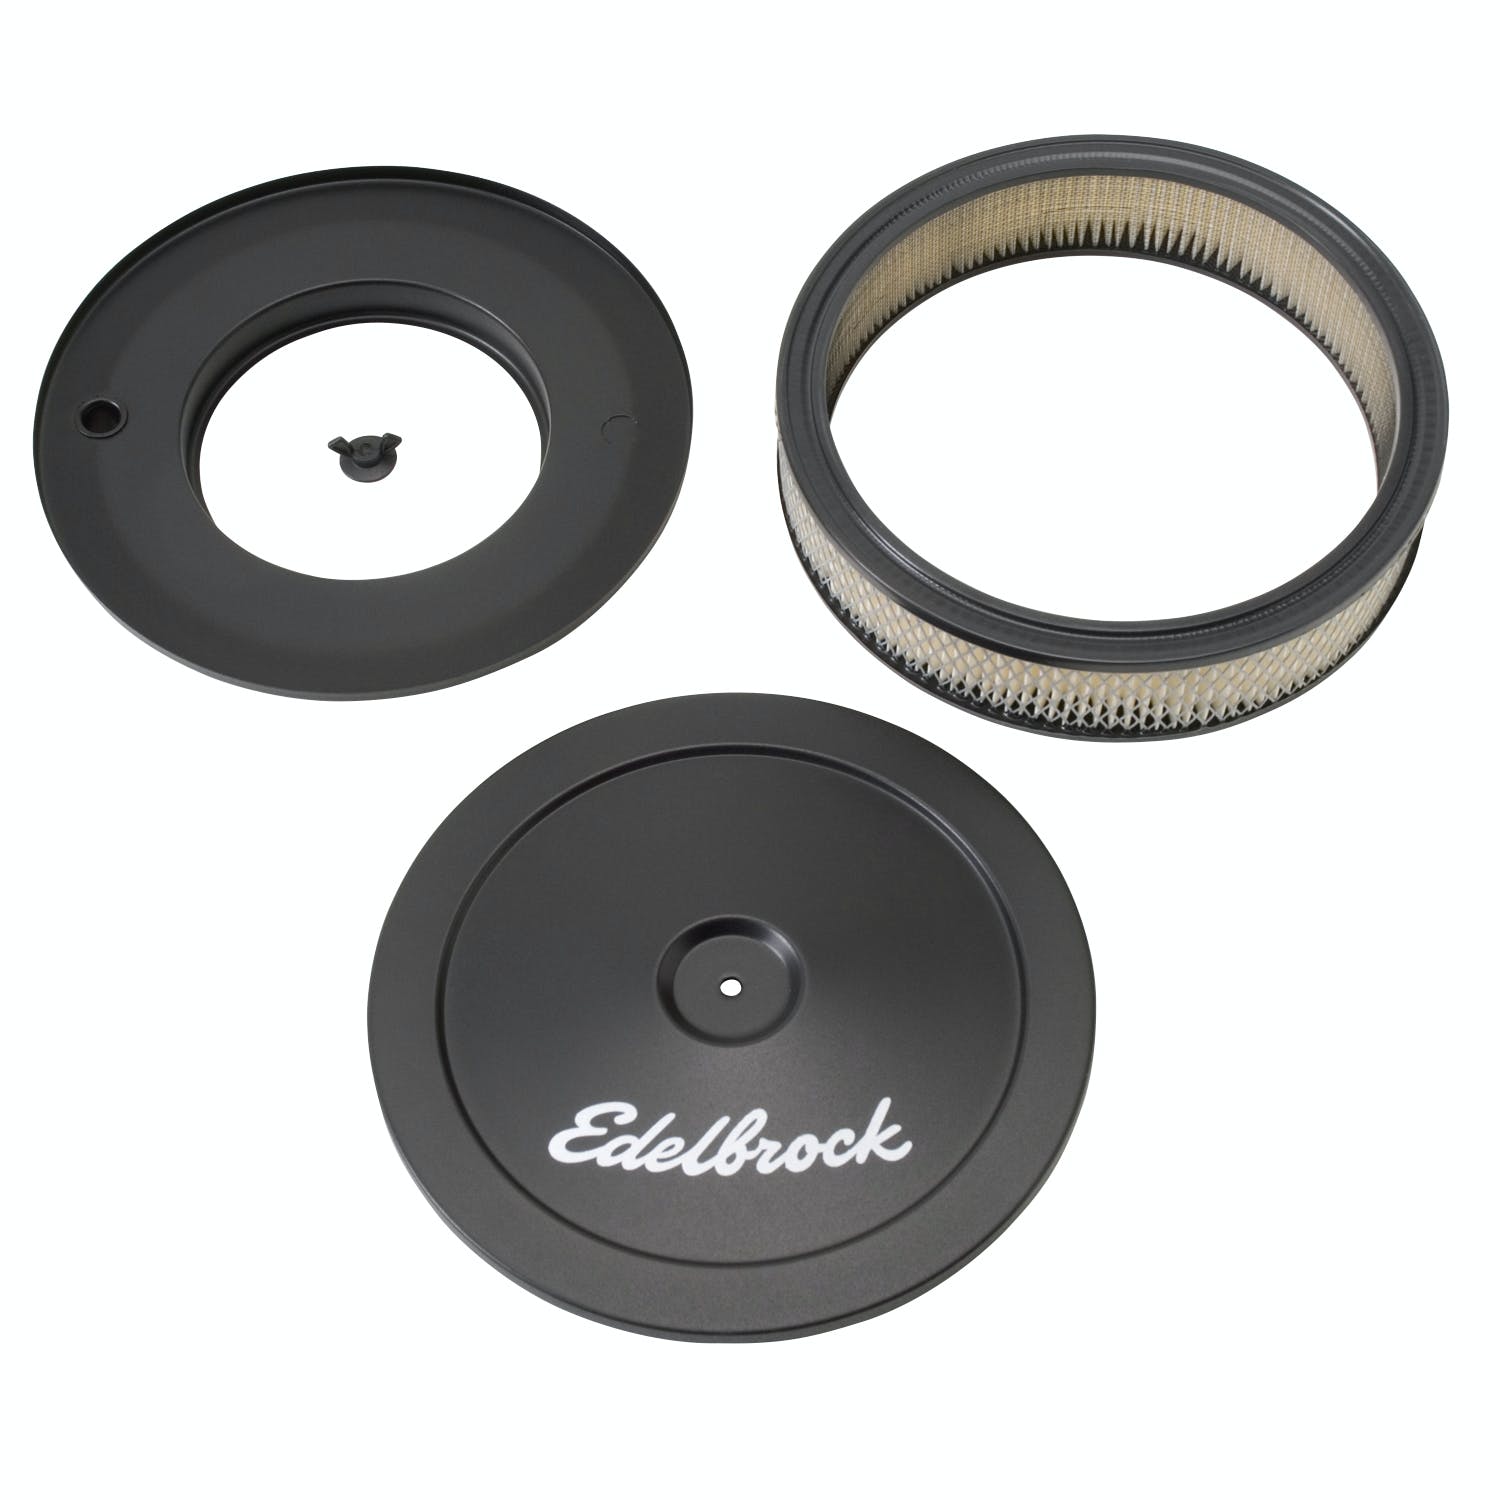 Edelbrock 1203 Pro-Flo Black 10 Round Air Cleaner with 2 Paper Element